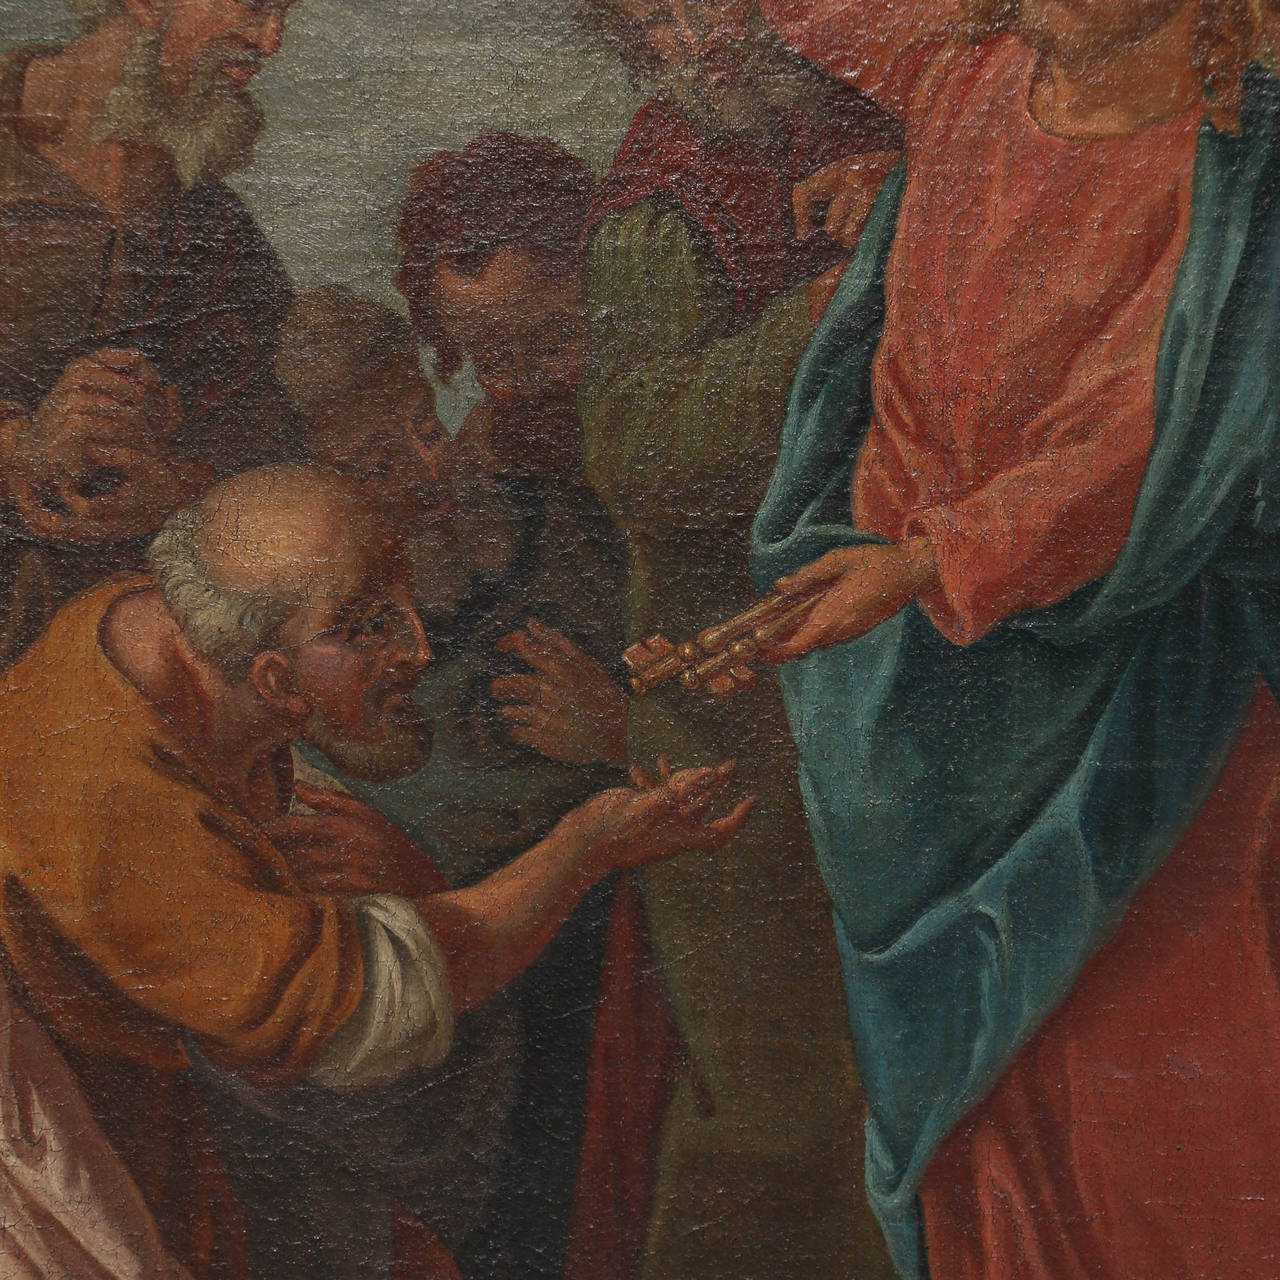 Original oil on canvas painting of Jesus handing over the keys to Saint Peter, unknown artist, unsigned. The colors of red, blue, green, brown and white are still vivid in this very old painting. Please examine the close up photos to appreciate the